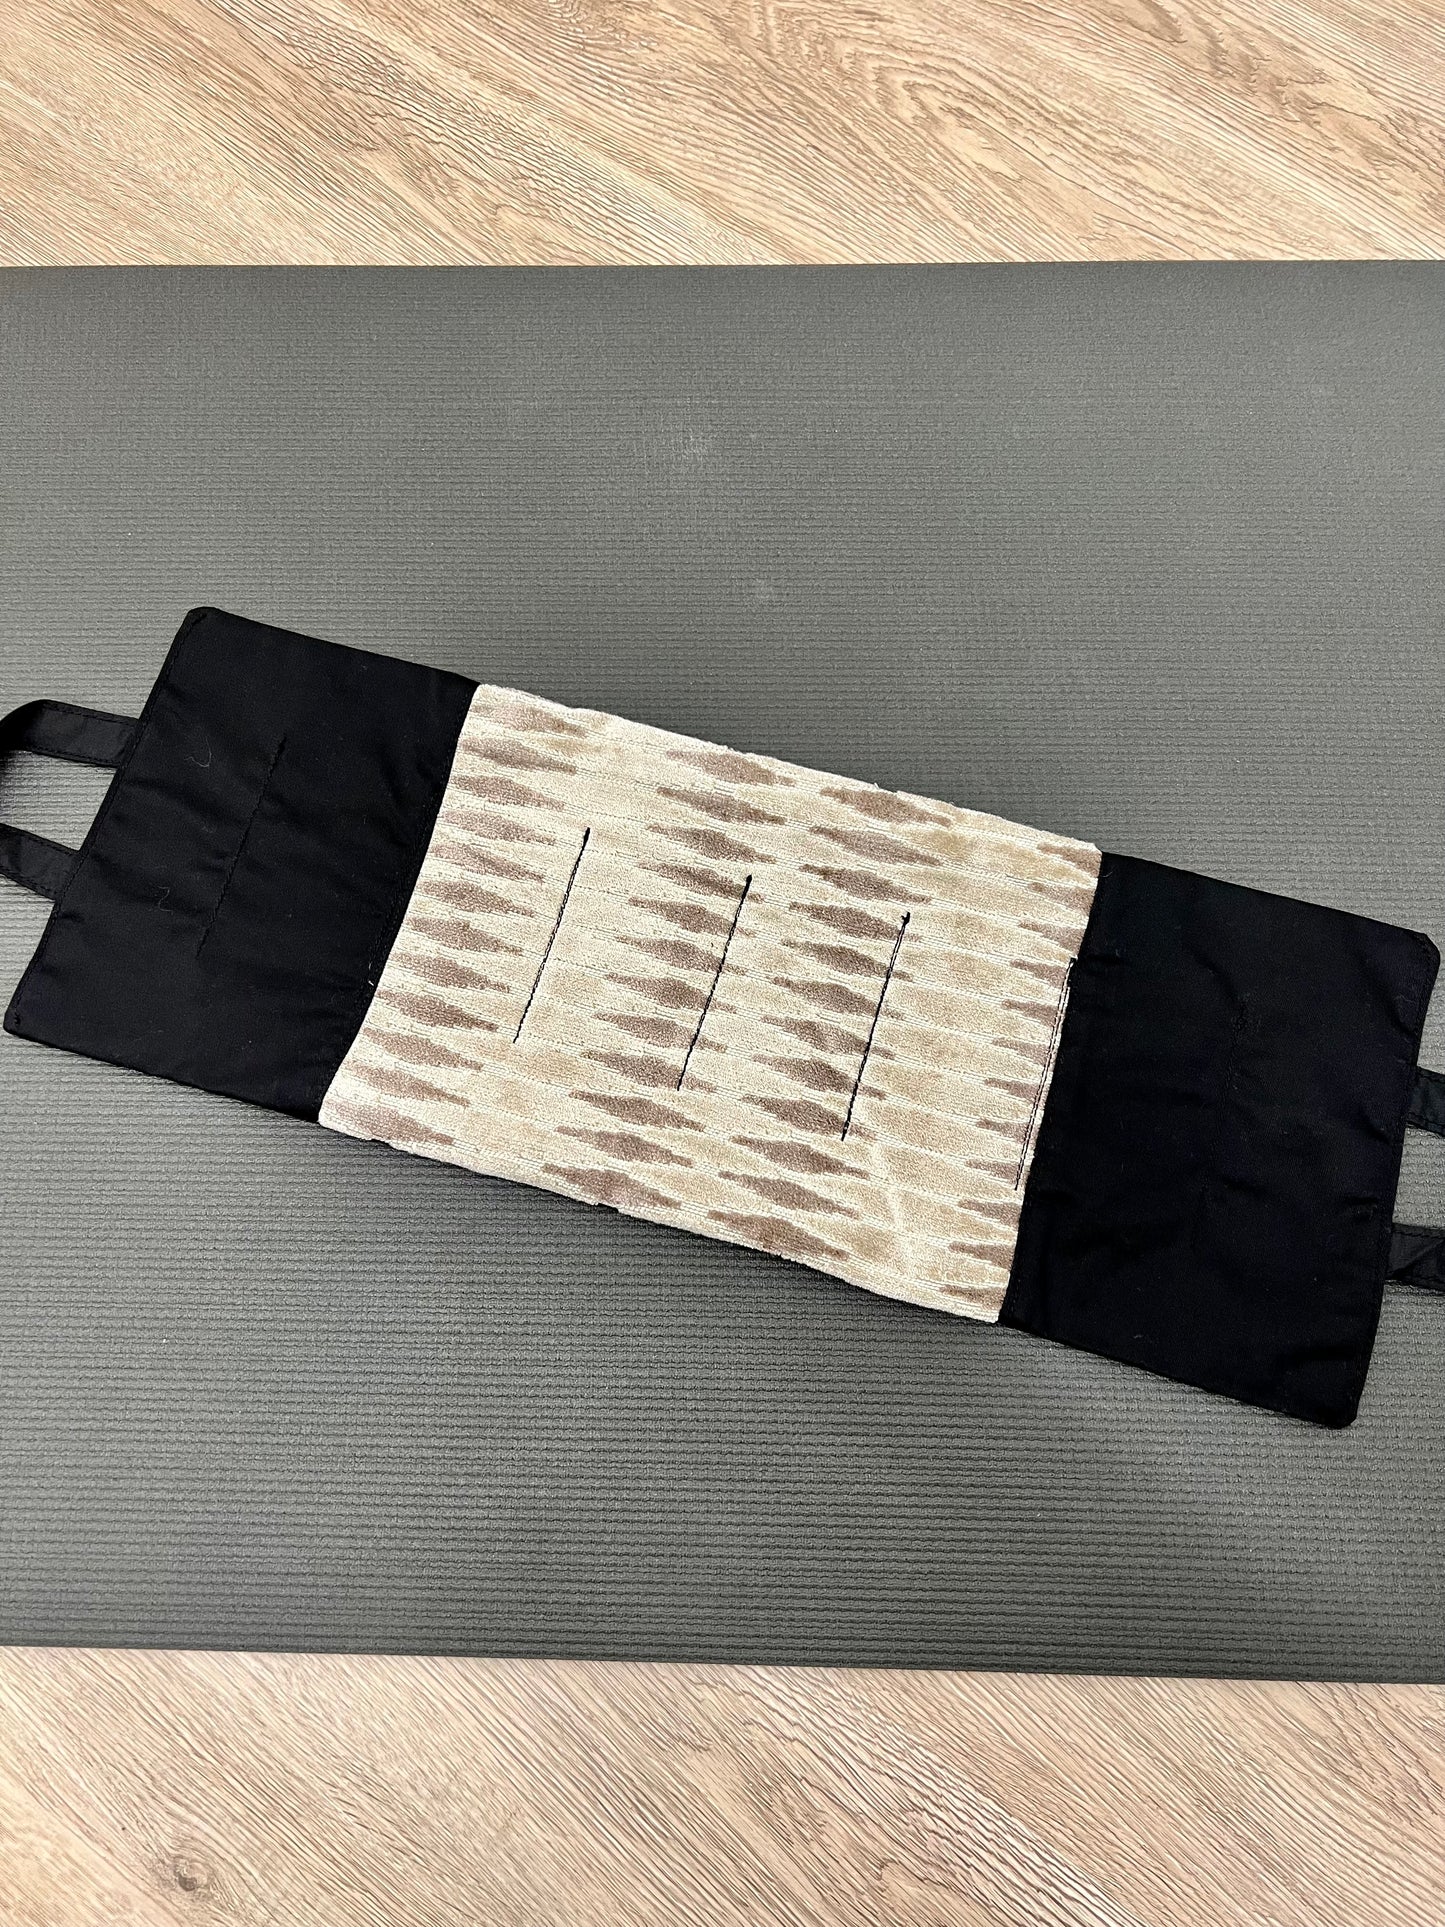 Yoga Sandbag version by My Yoga Room Elements. Add grounding to your practice with this heatable yoga prop. Handcrafted in Calgary in plush diamond print fabric.